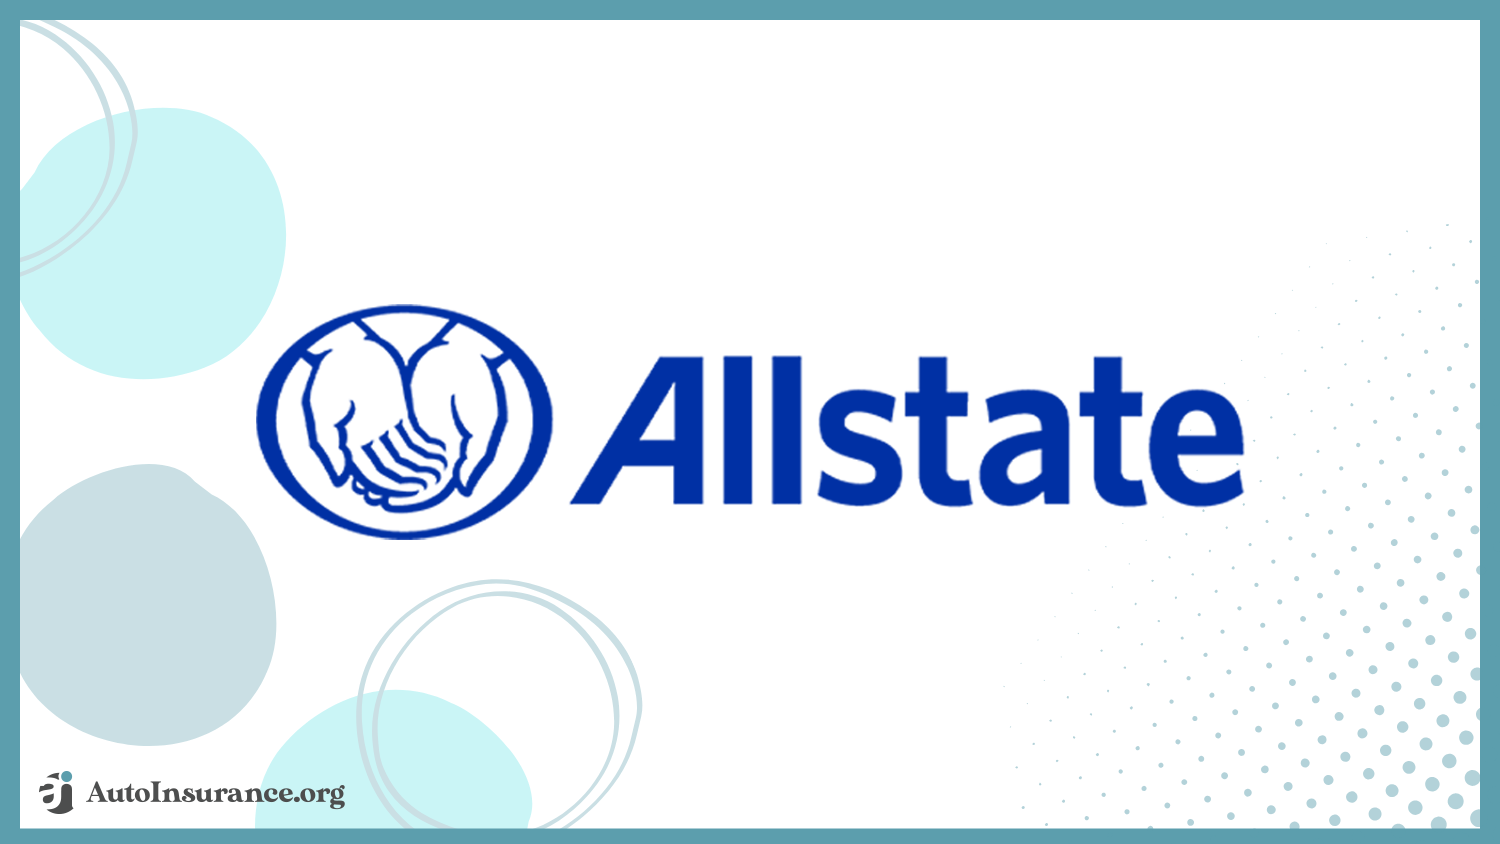 Allstate: Best Auto Insurance Companies That Don't Ask for Your SSN